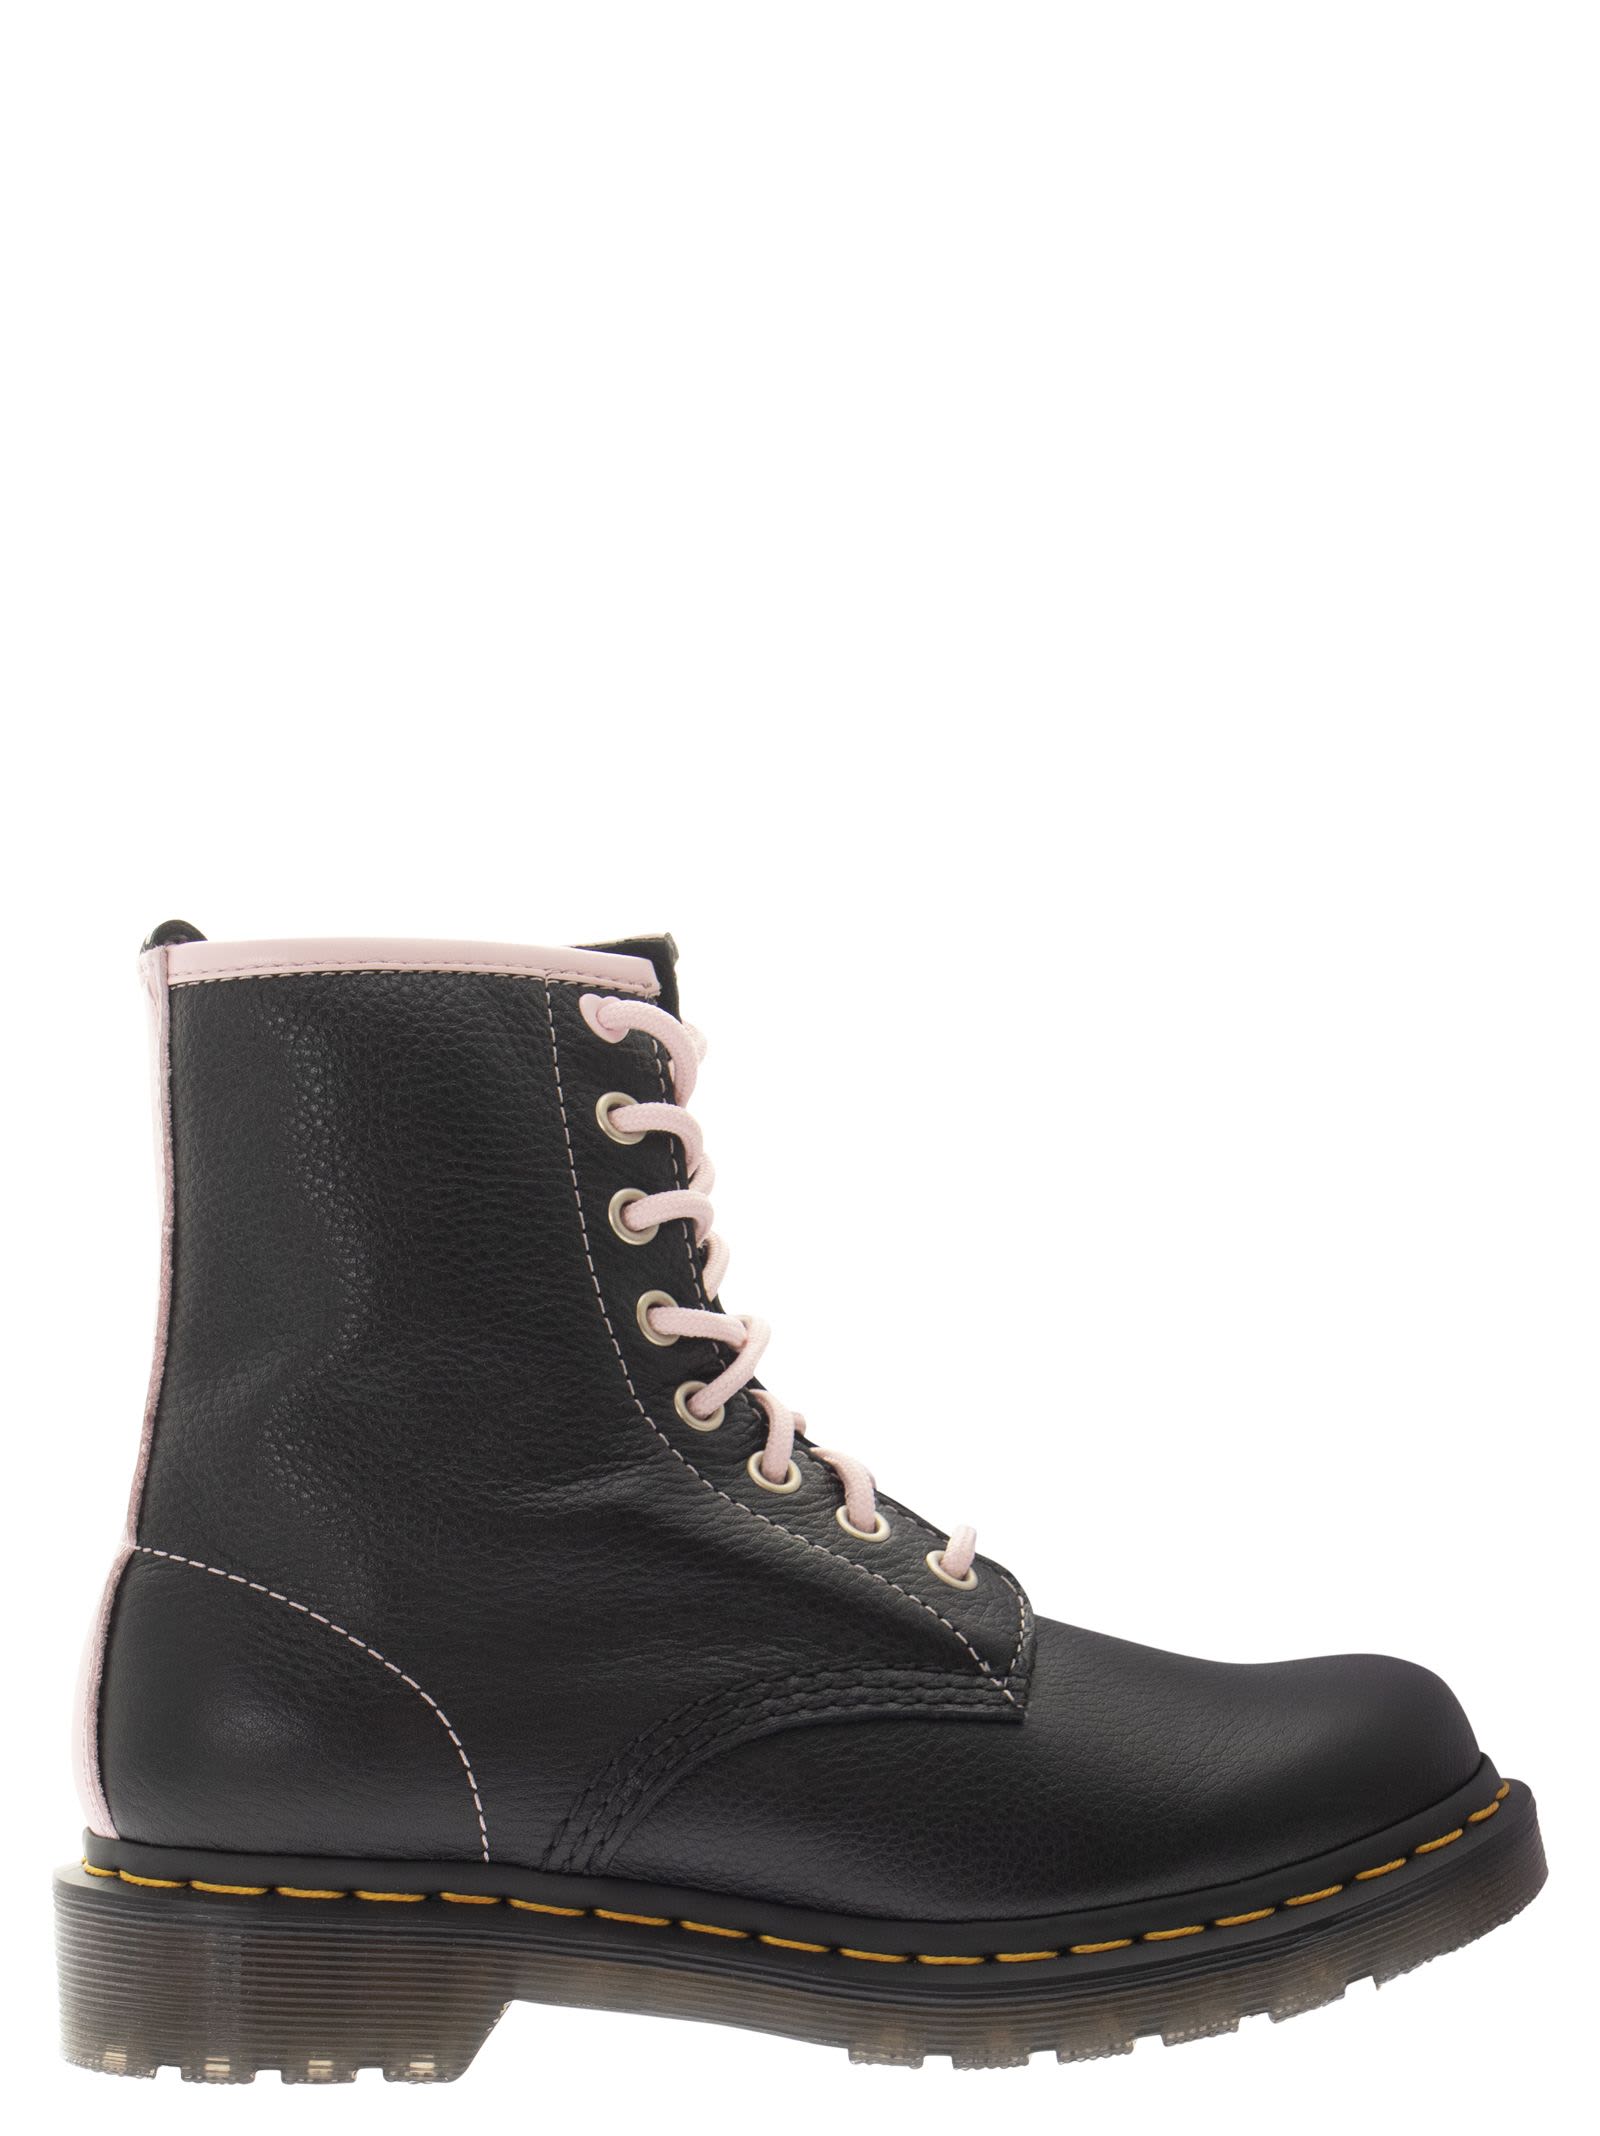 Dr. Martens Boot 1460 - Two-tone Soft Leather Ankle Boot